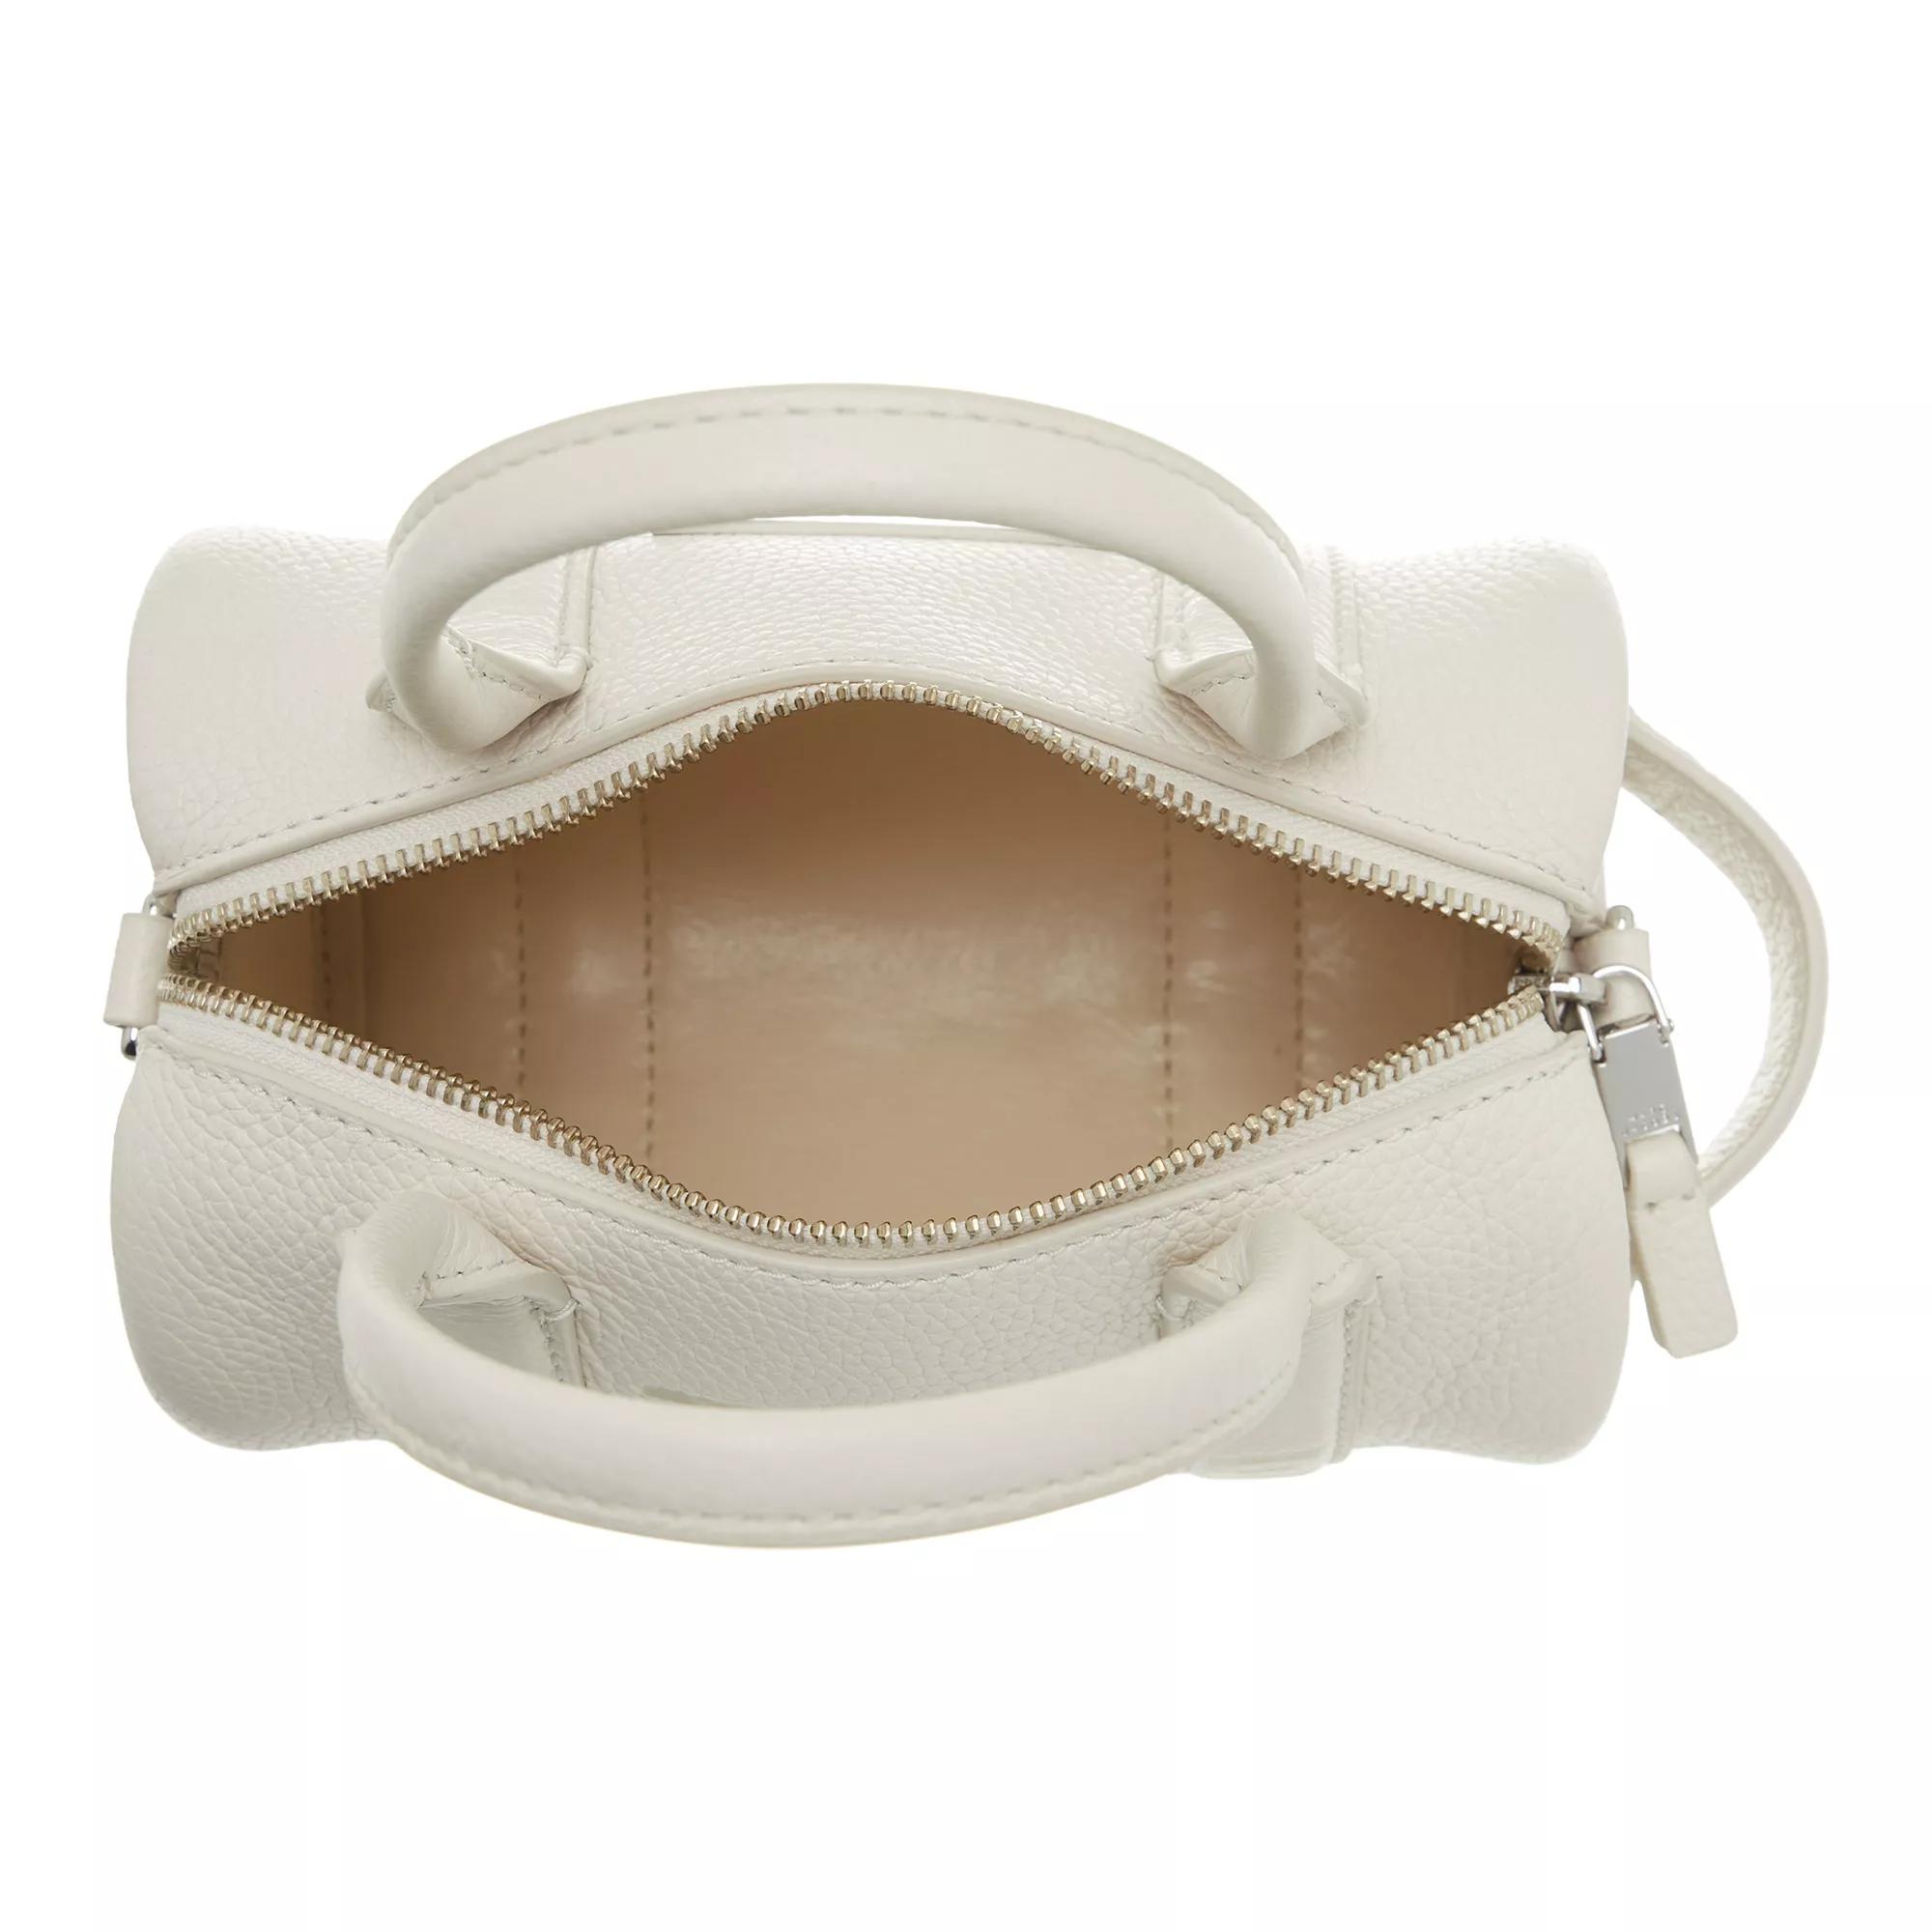 Marc Jacobs Crossbody bags The Mini Duffle in crème